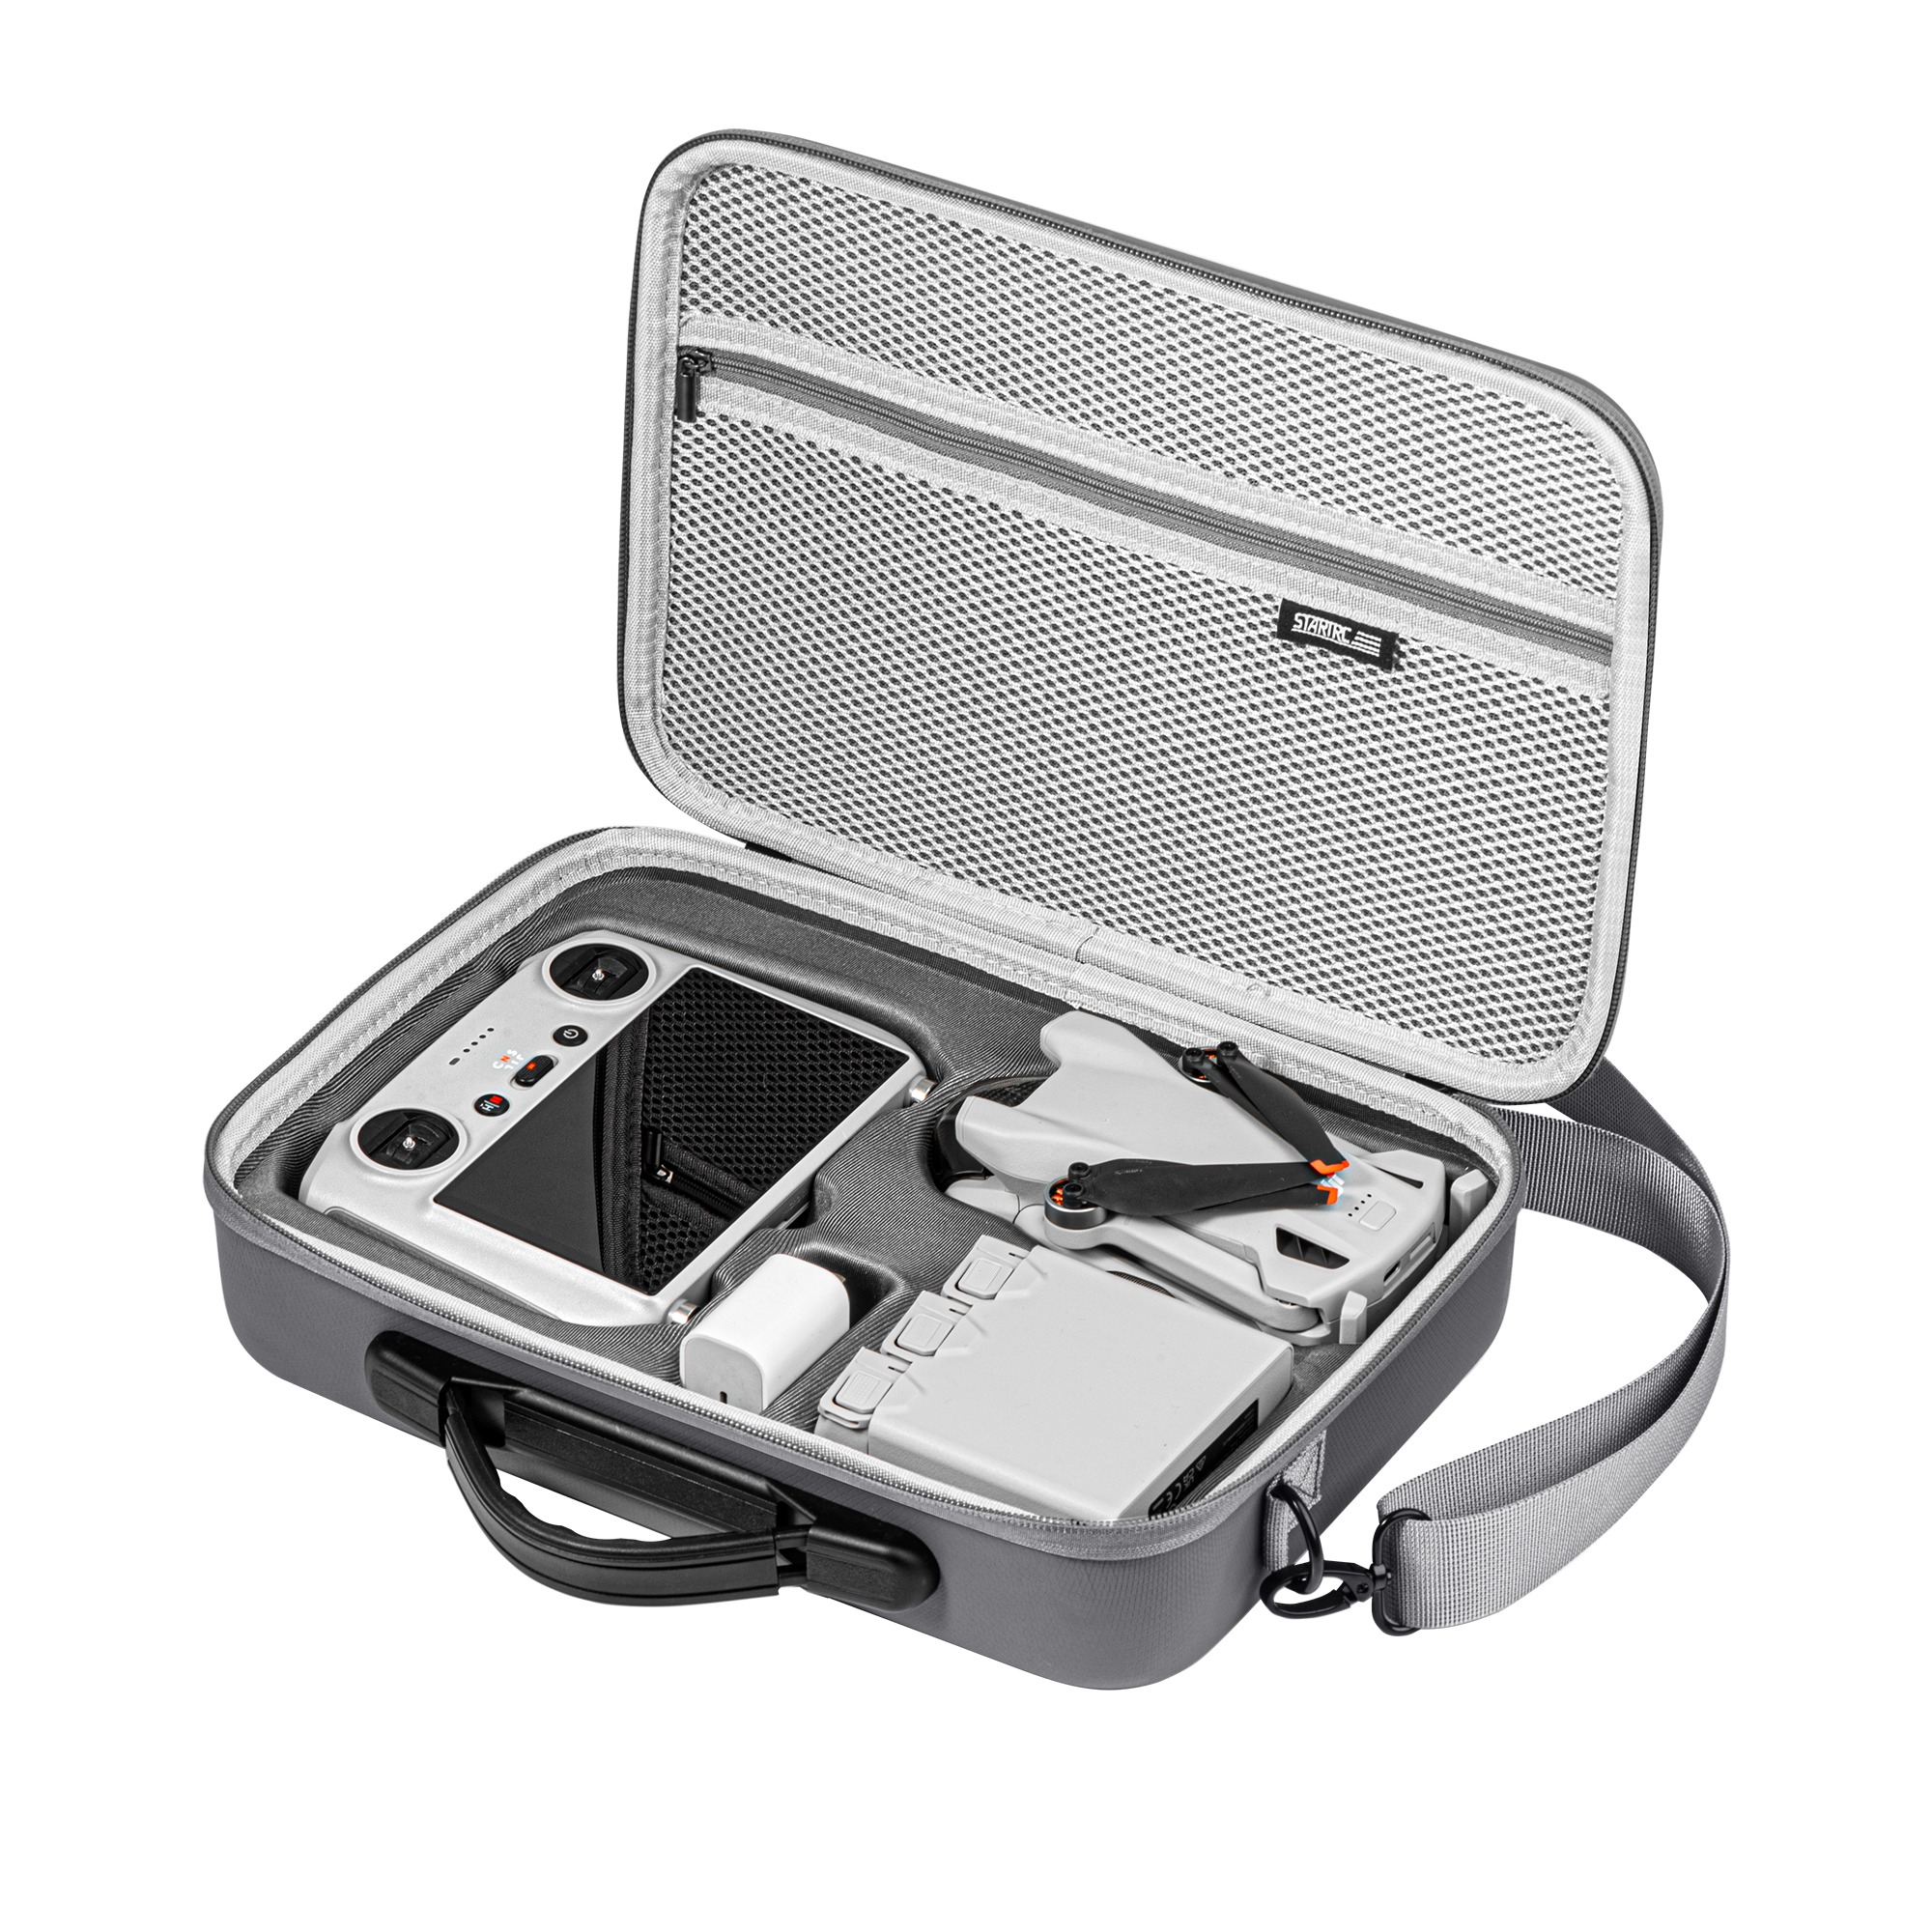 DJI Mini 3 with DJI RC Remote and Hard-Shell Case Kit (Fly More Combo)